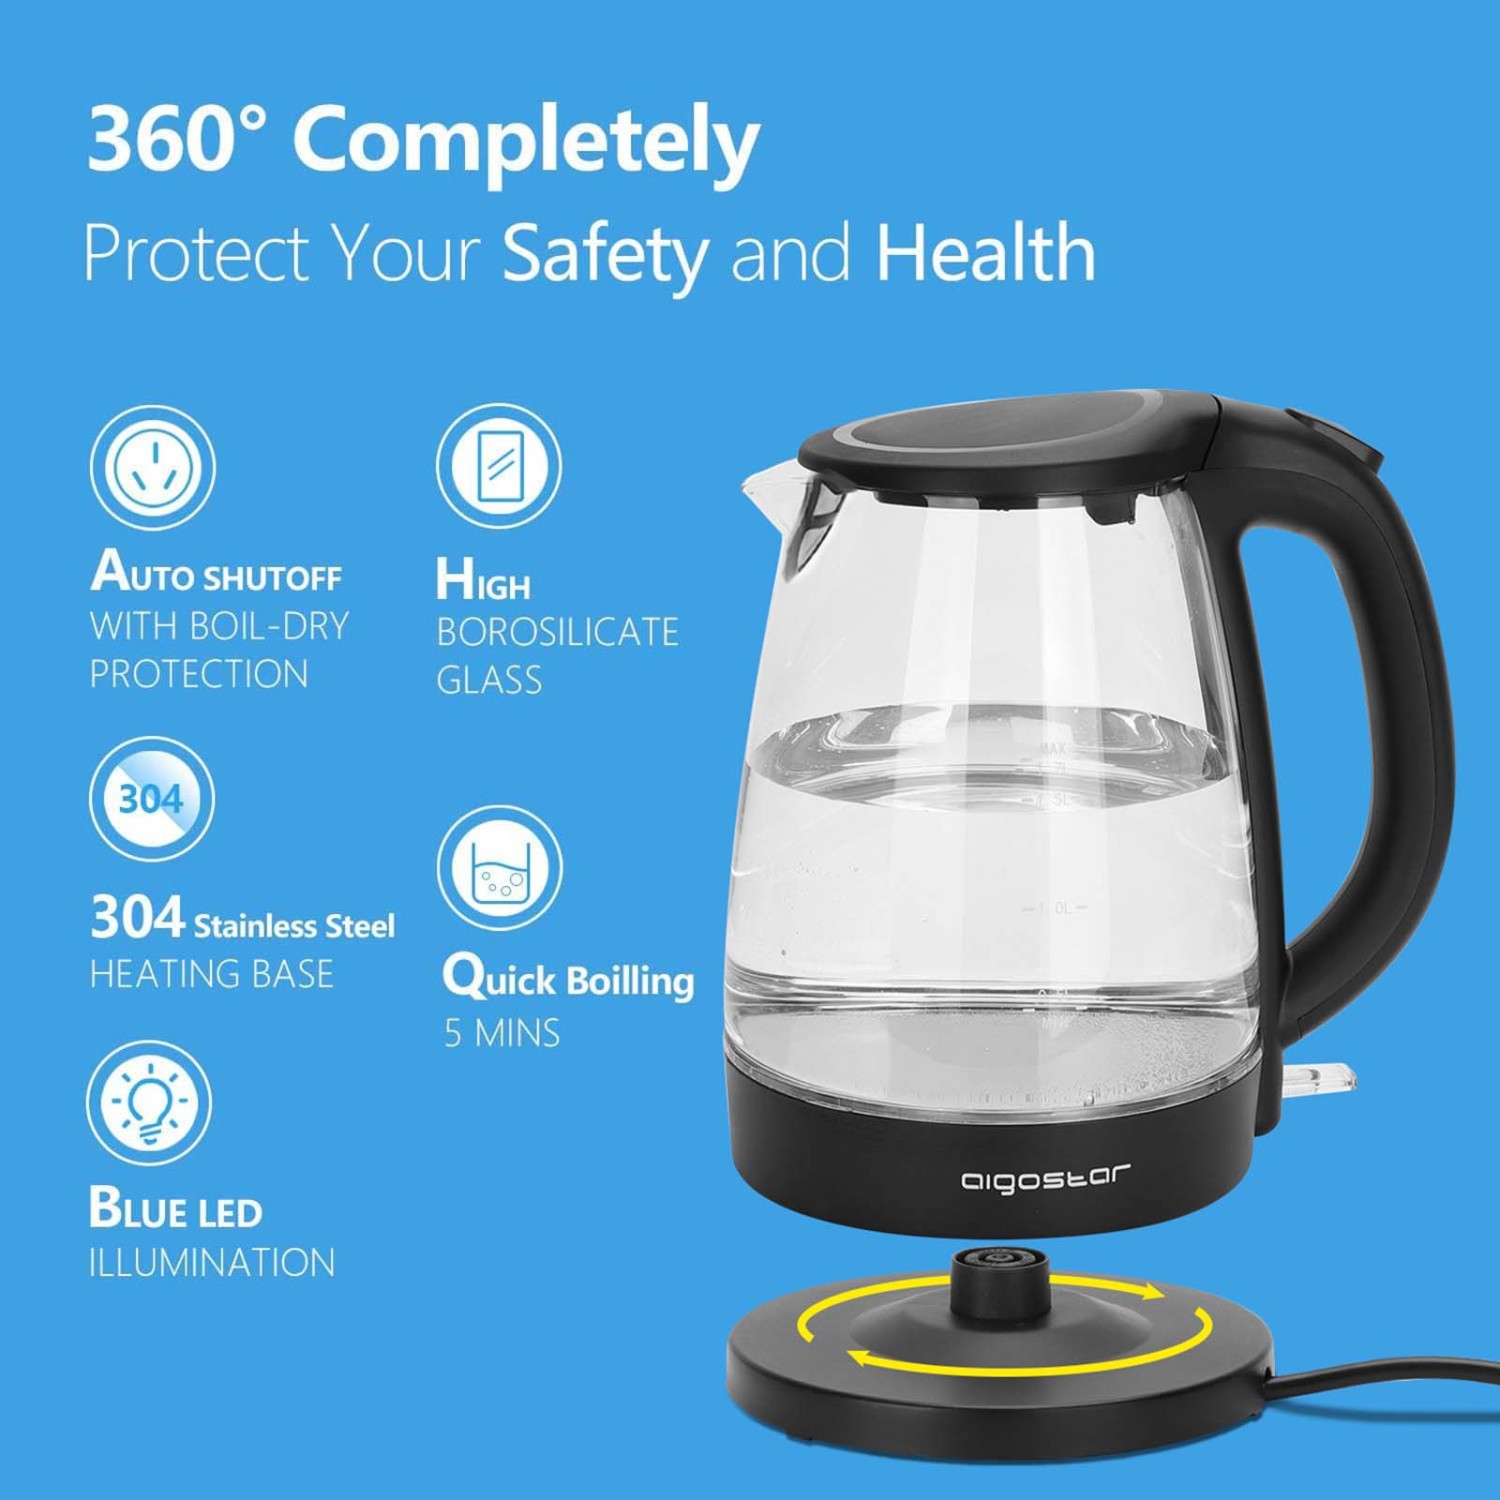 Aigostar Adam – Glass Water Kettle with LED Lighting (500863)